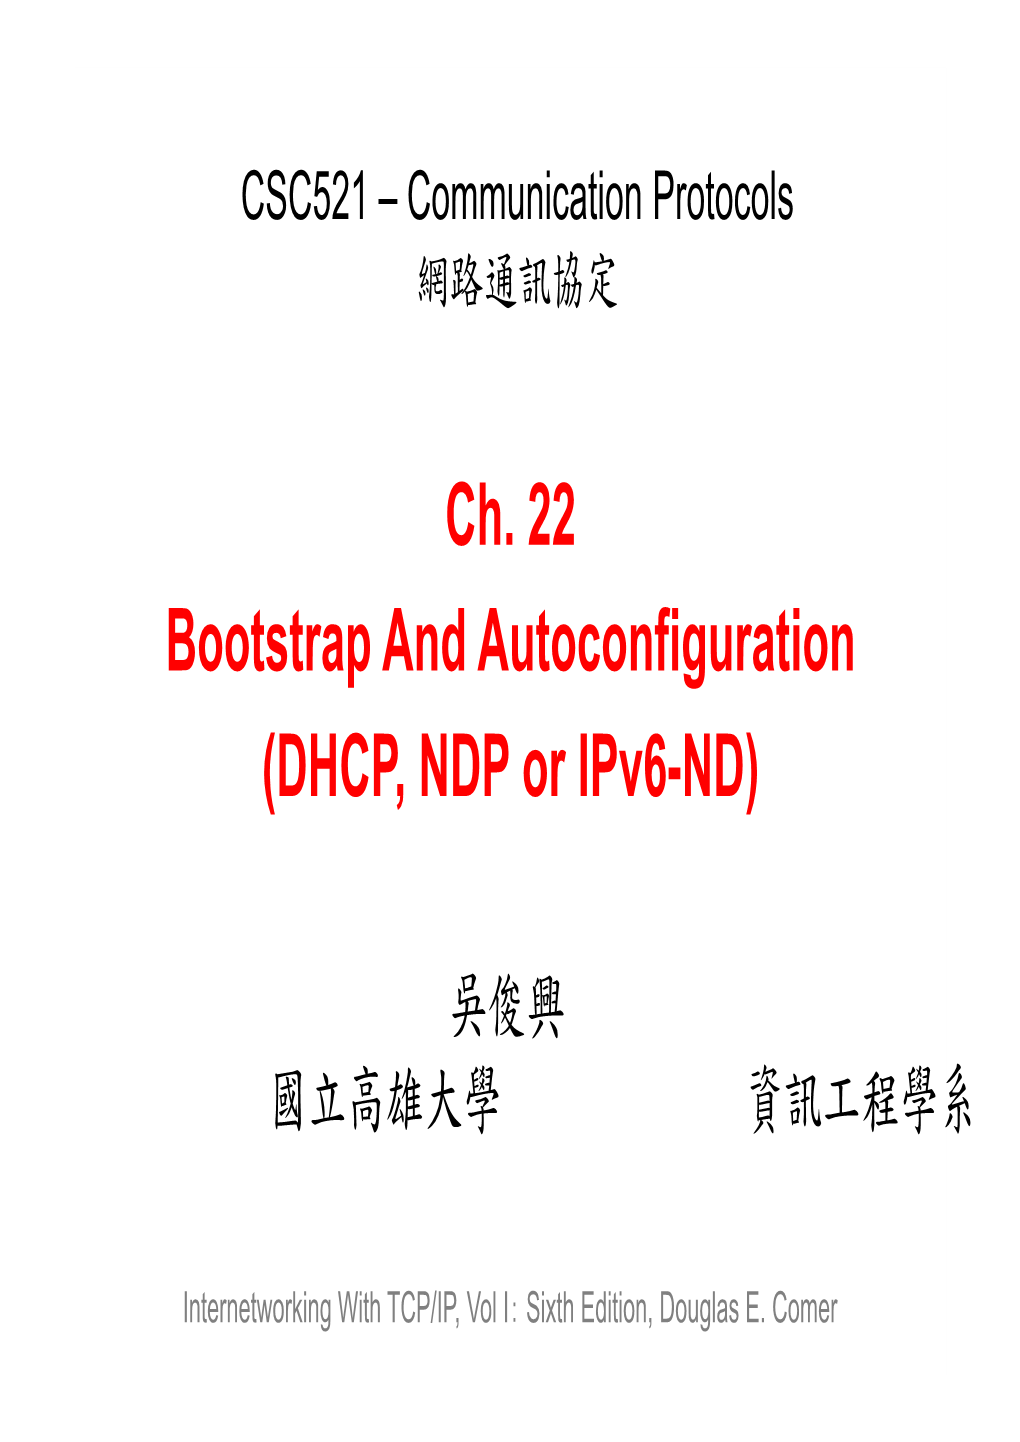 DHCP, NDP Or Ipv6-ND)